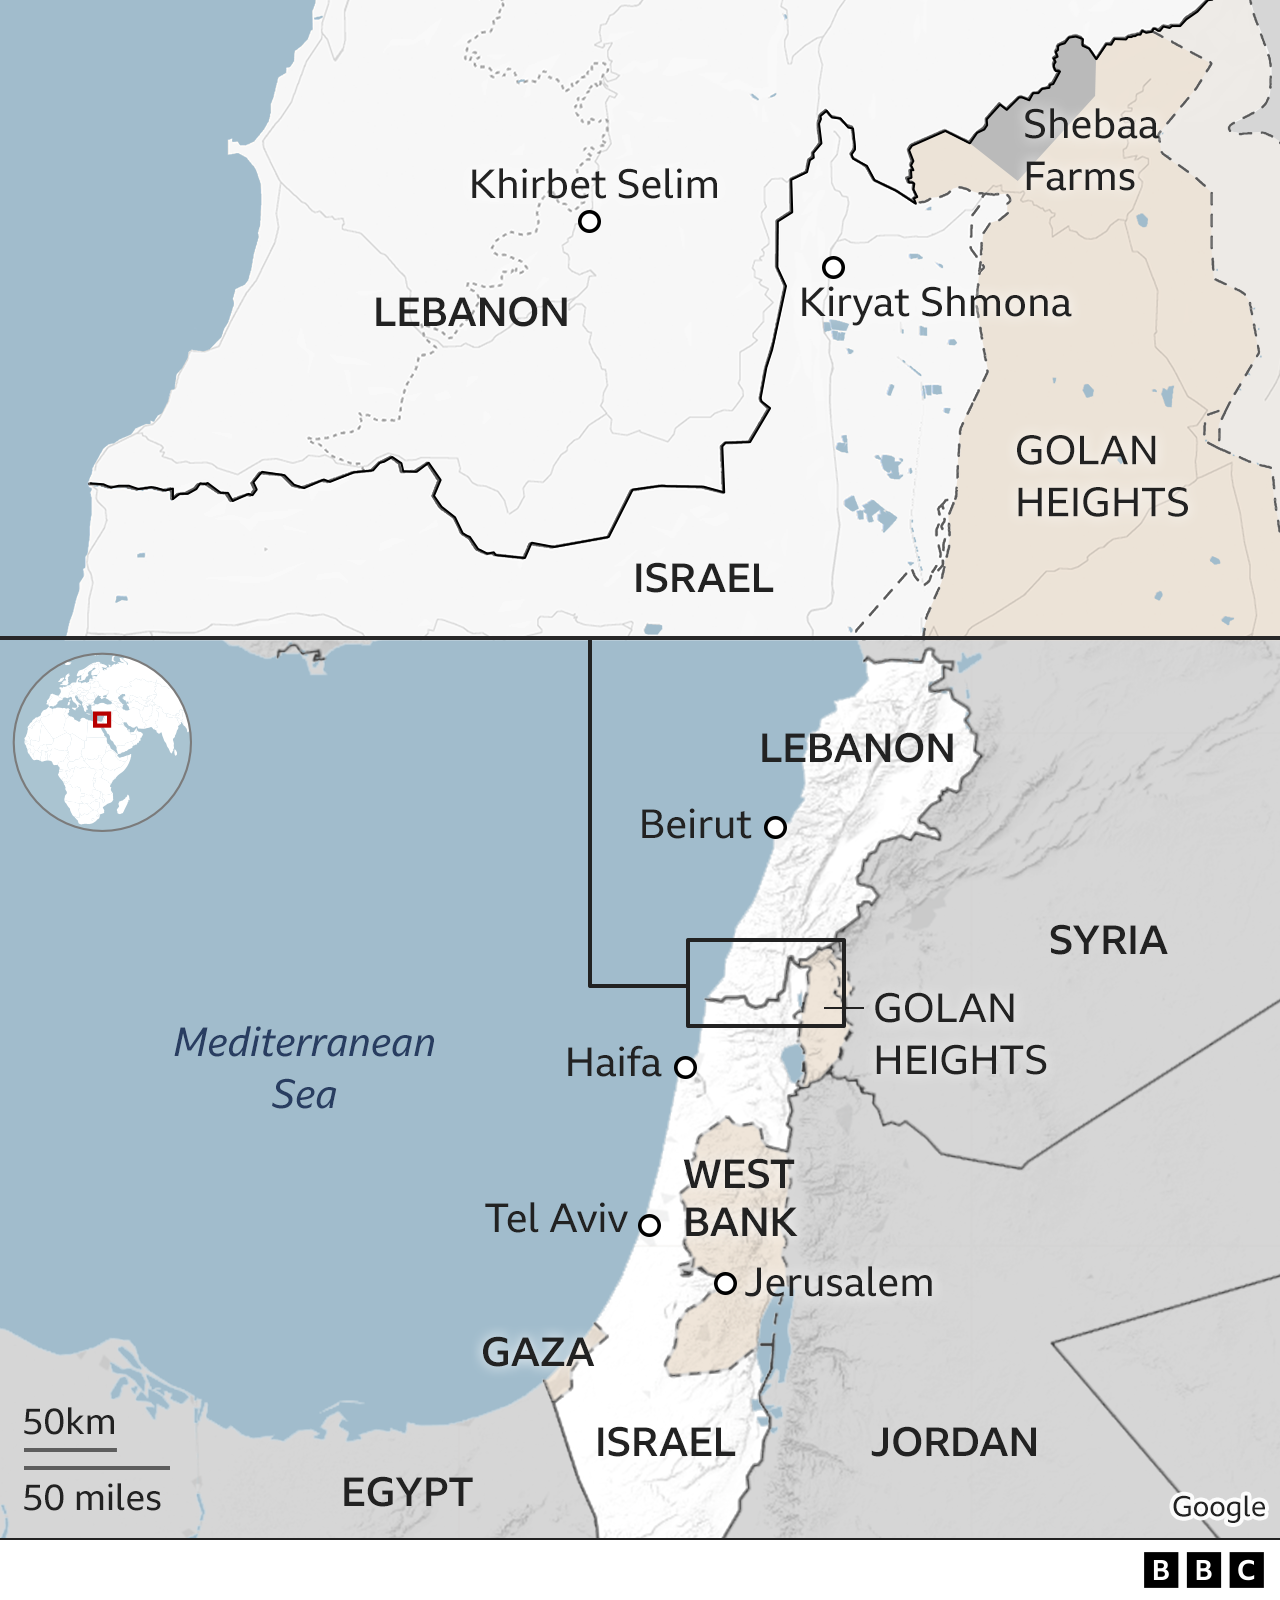 Map showing Israel and Lebanon, including locations of Khirbet Selim and Kiryat Shmona